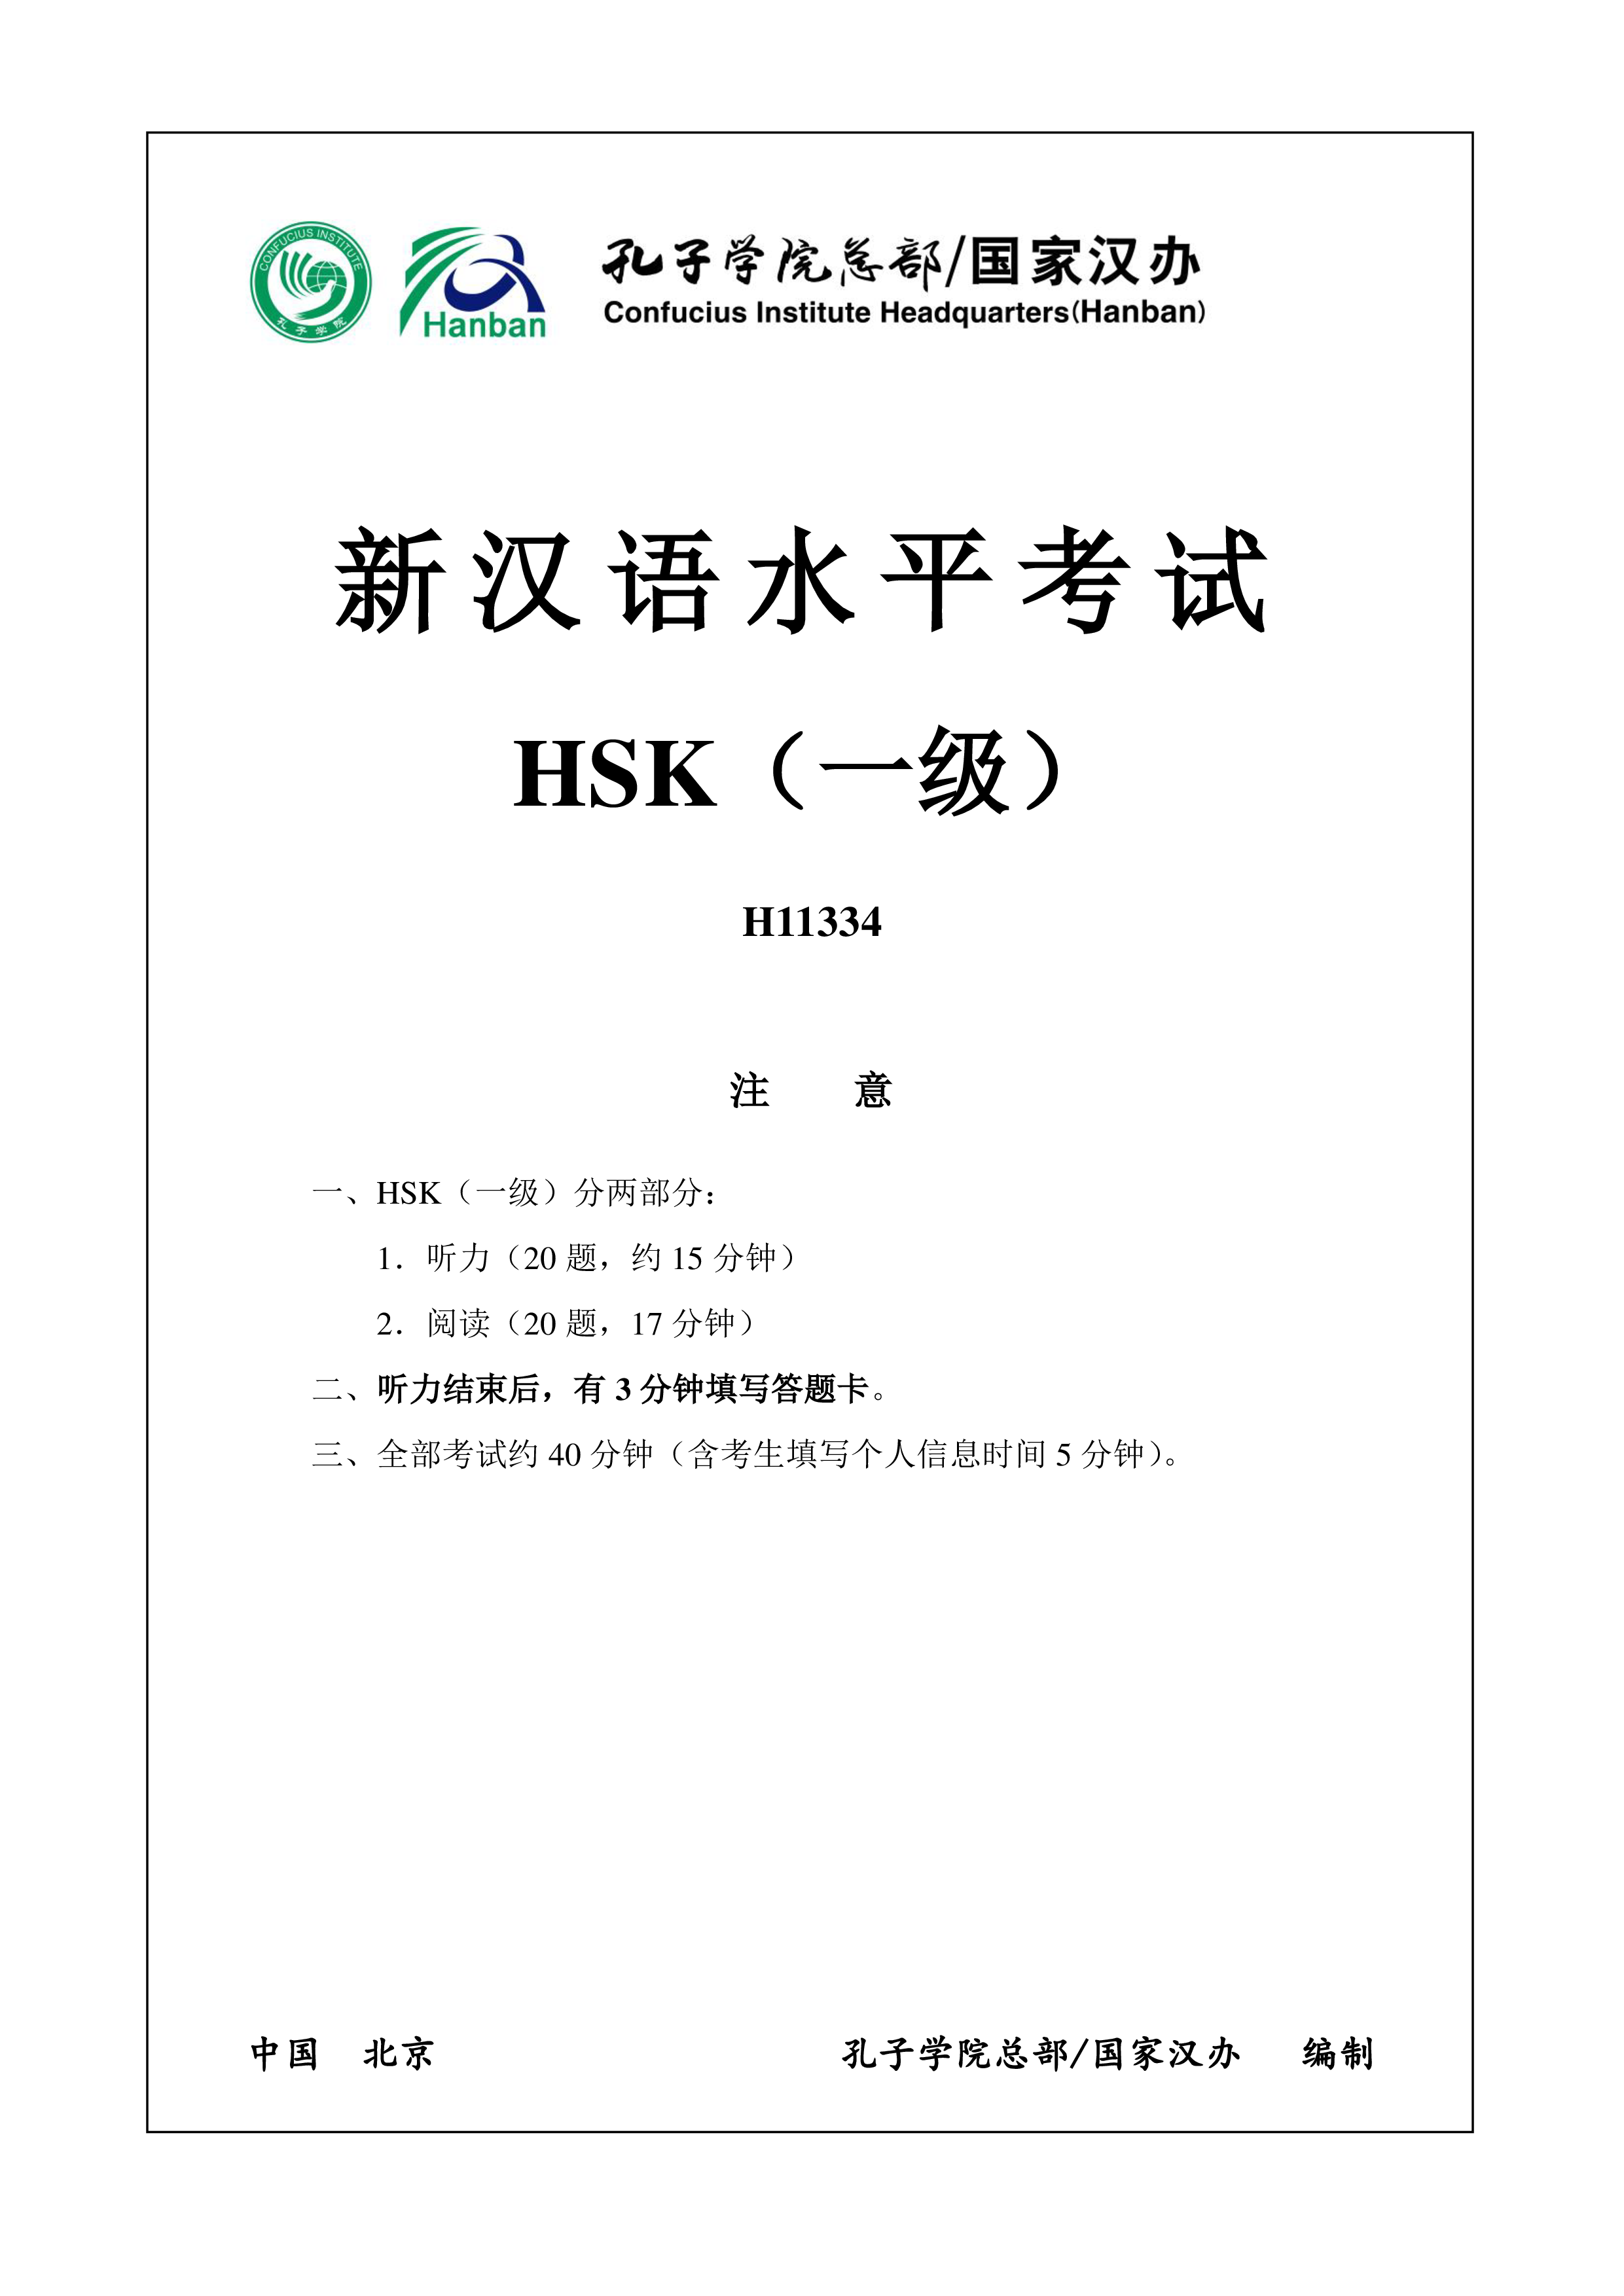 hsk1 chinese exam including answers # hsk1 h11334 plantilla imagen principal